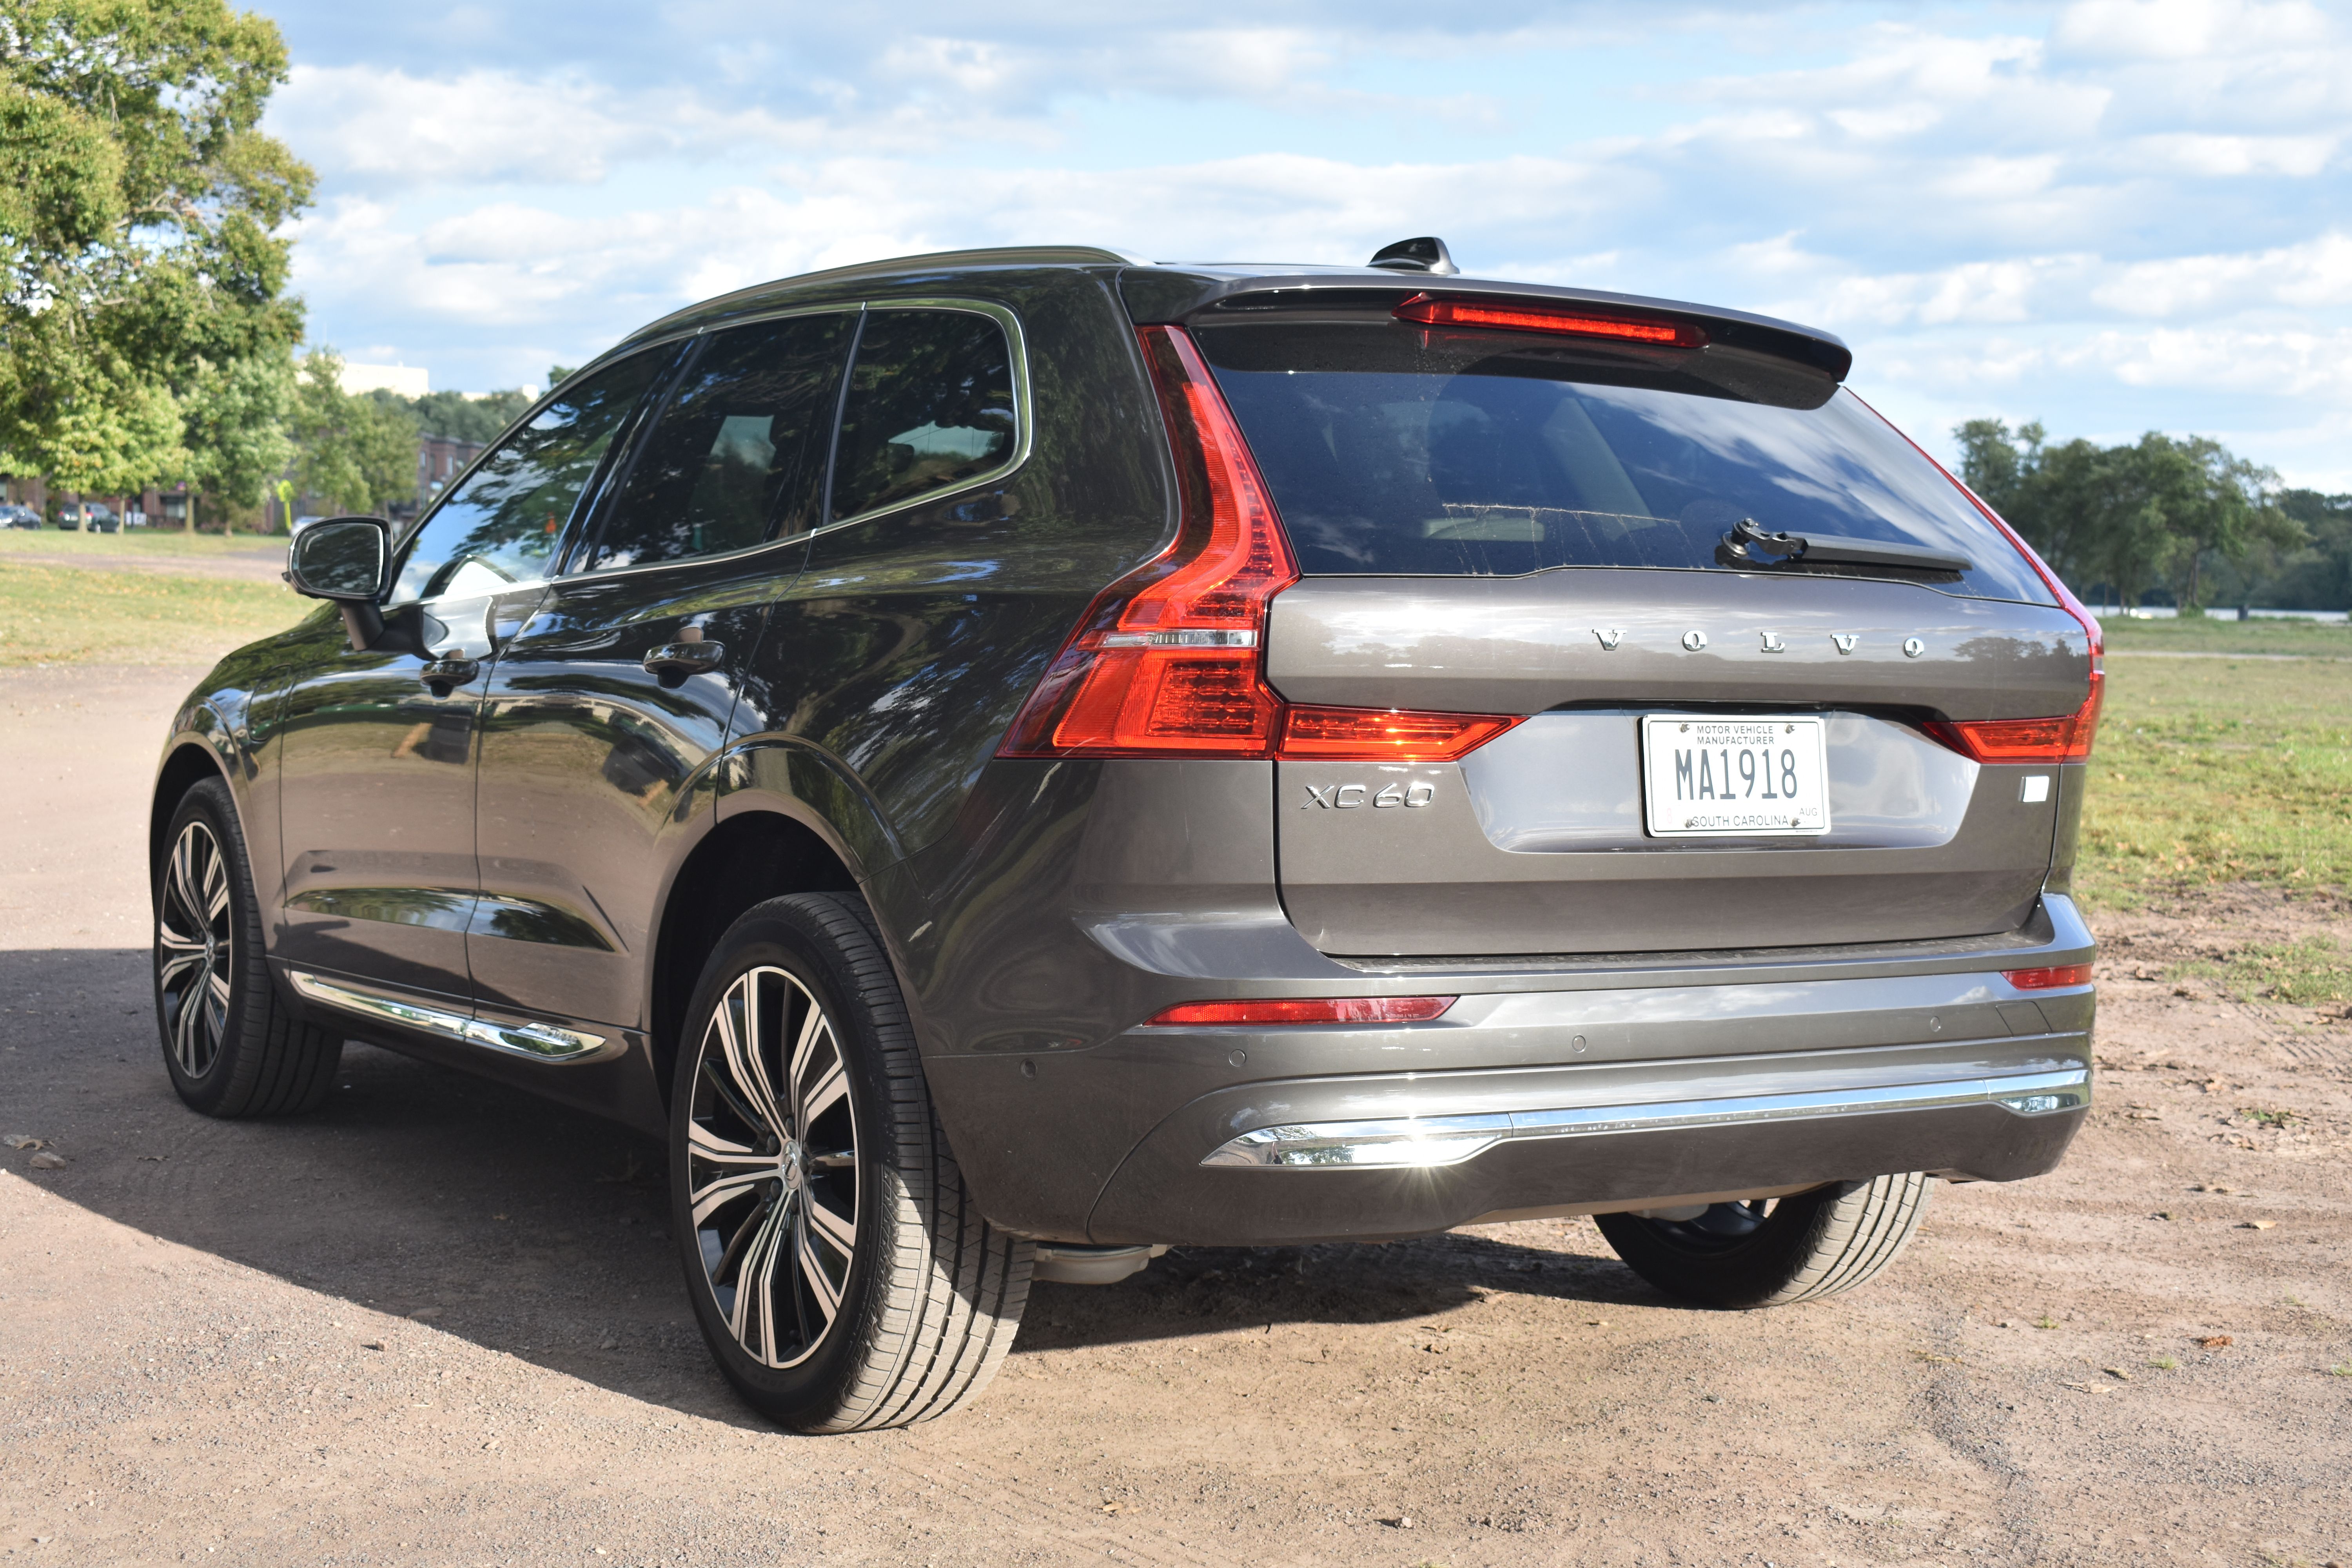 Volvo XC60 review: sleek and sustainable with a speedy secret